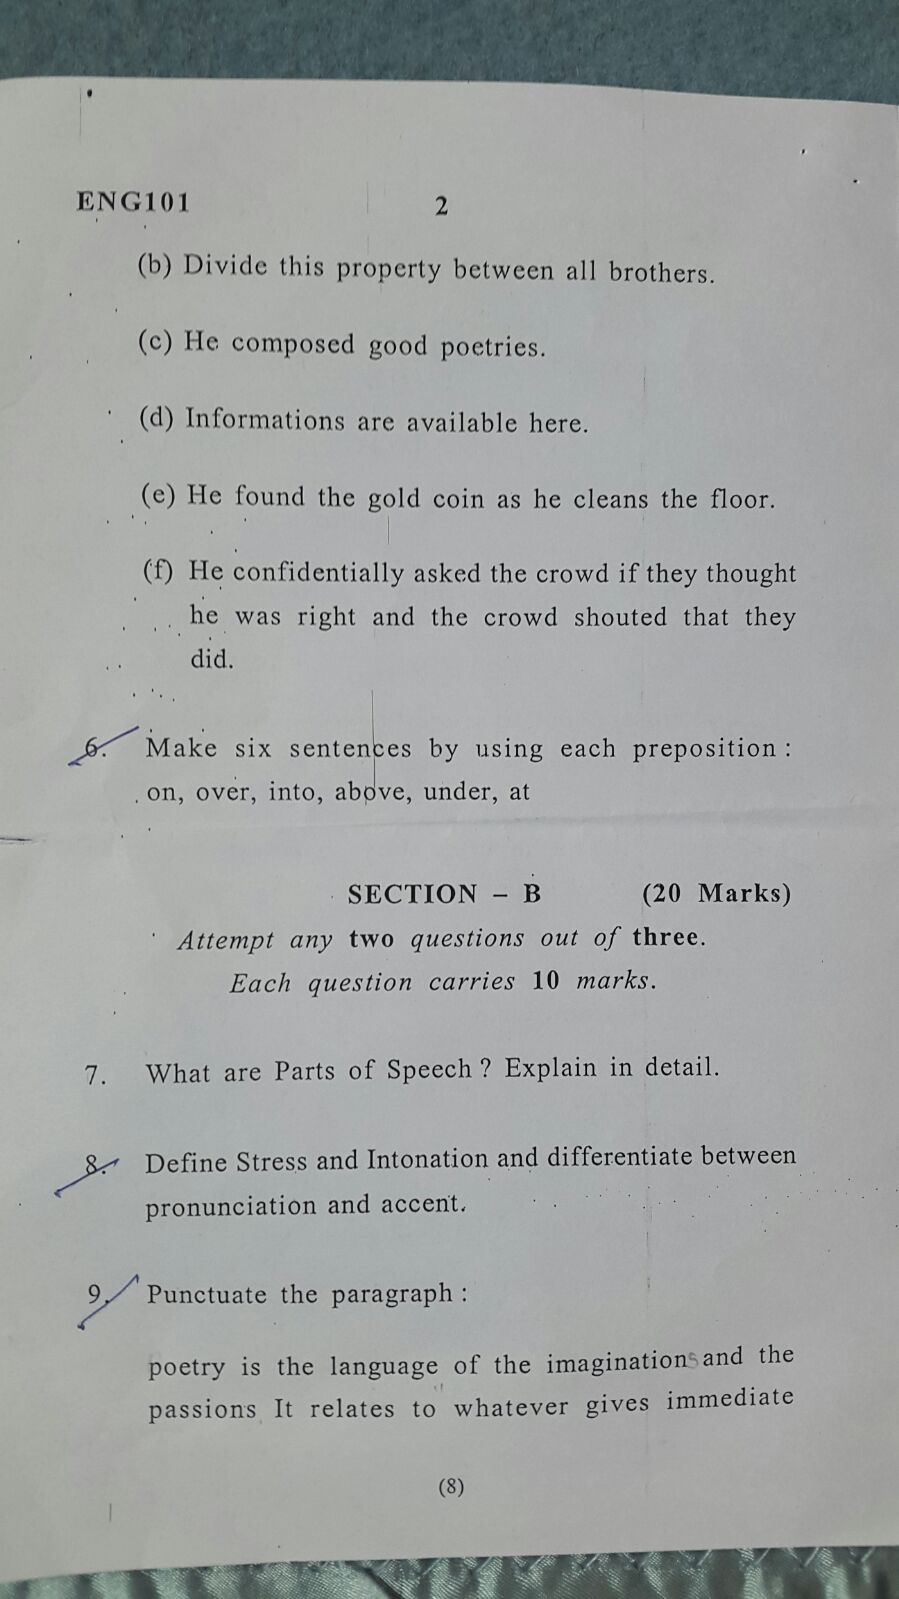 Amity english question paper for sem 1 aset-eng02.JPG